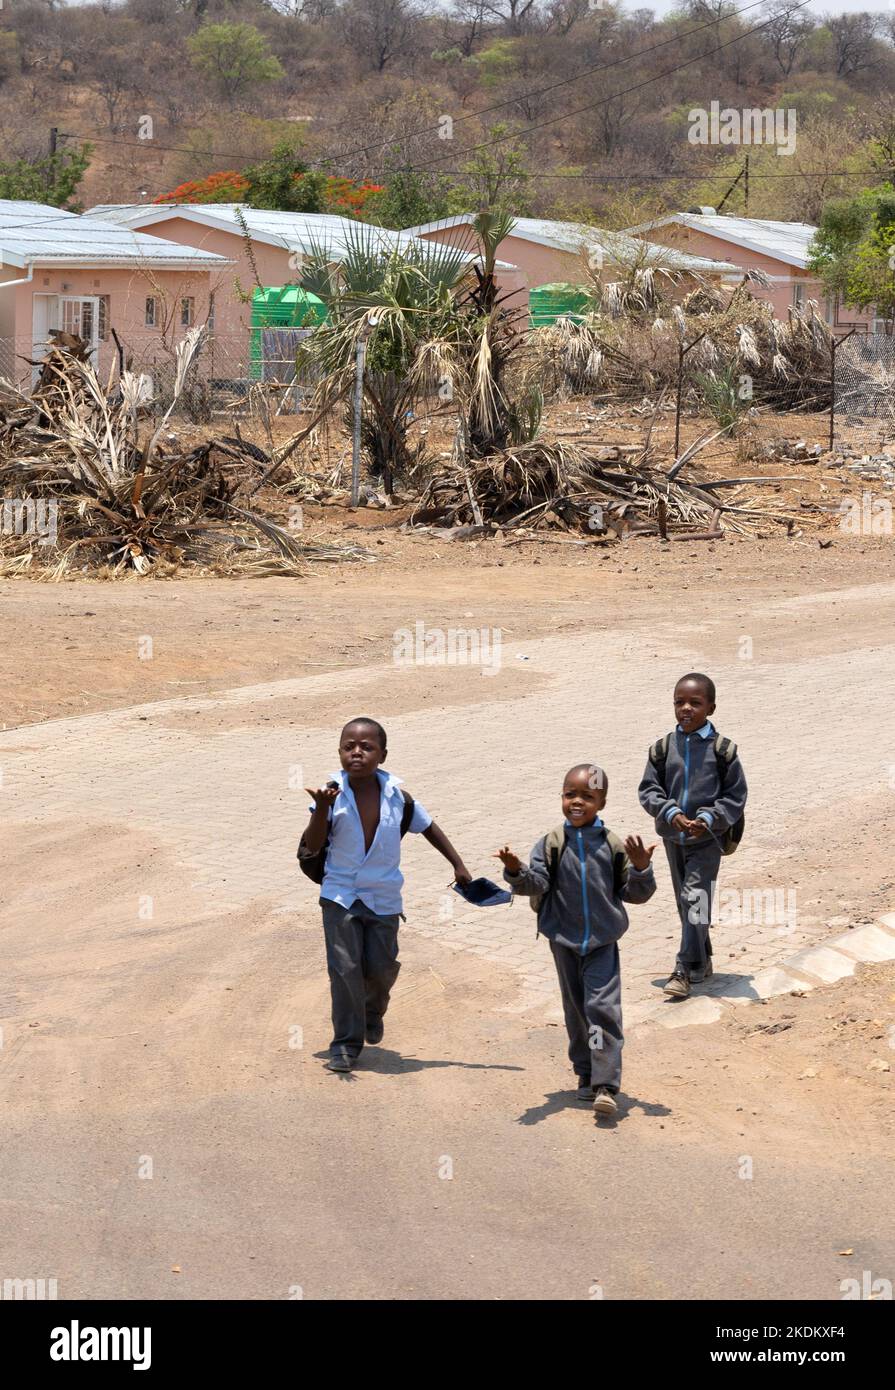 Africa children; three young african boys on the road, Kasane town, Botswana Africa. African children age 10 years. Stock Photo